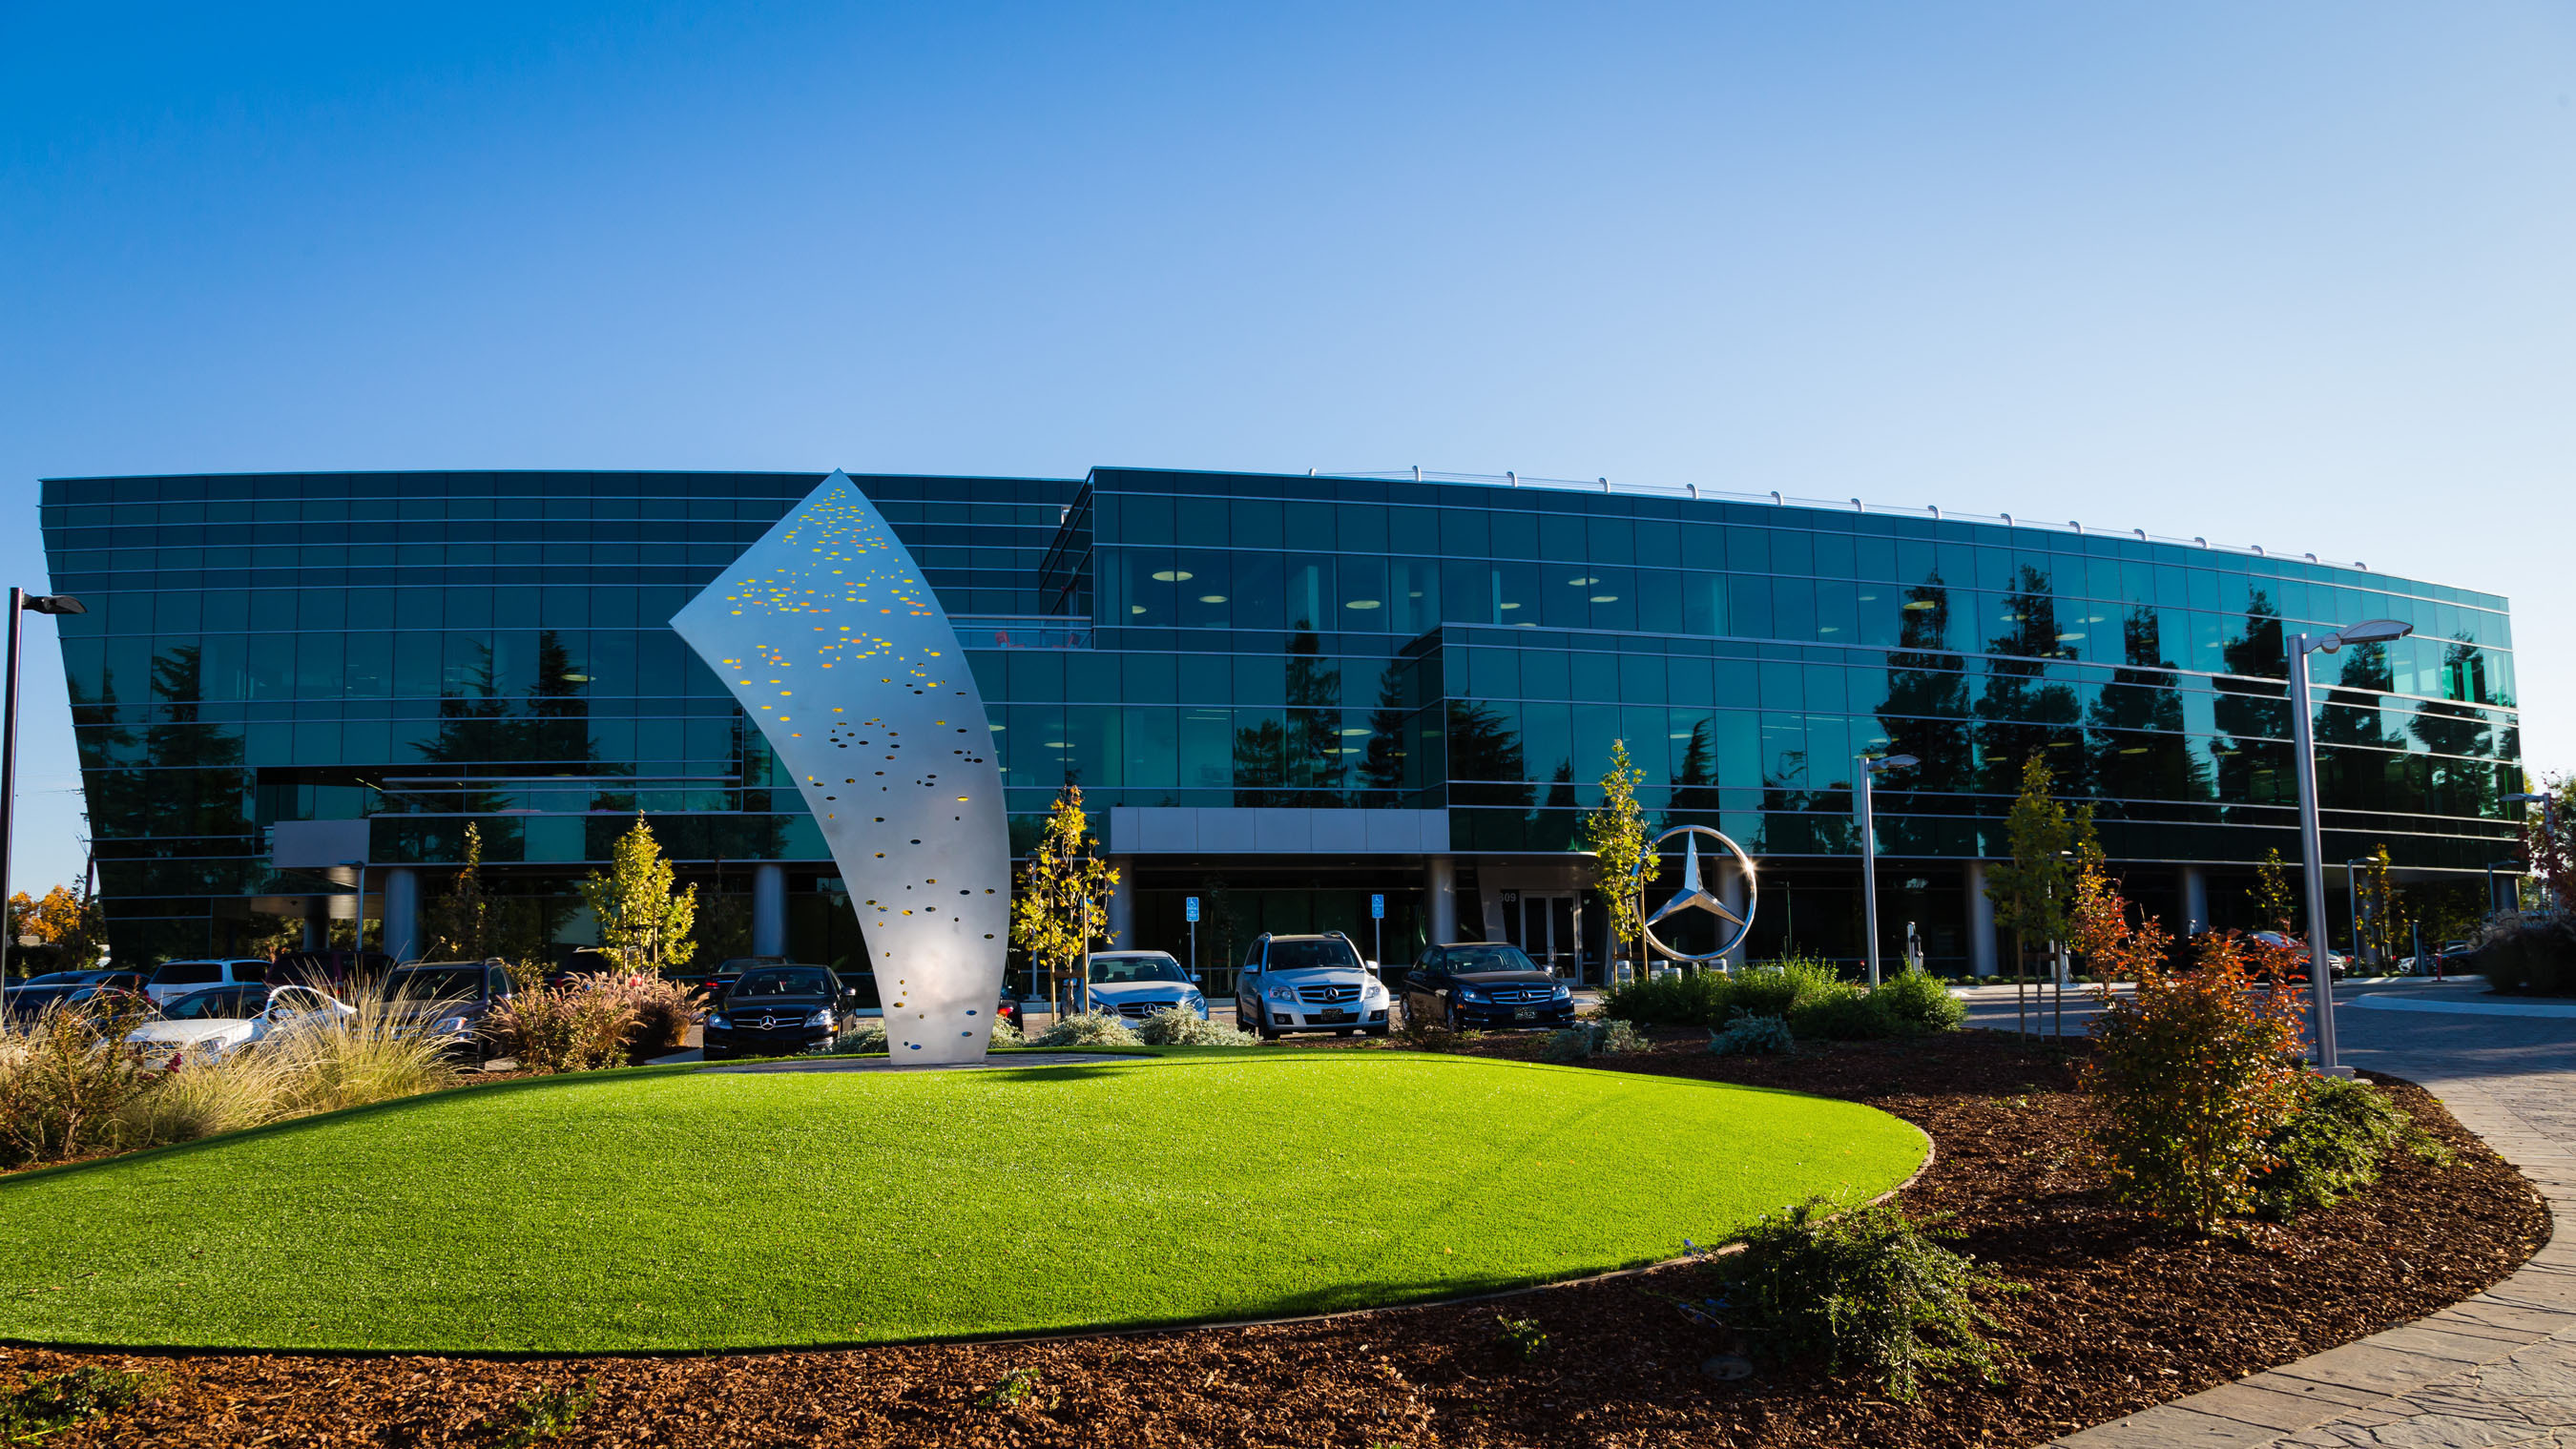 New Mercedes-Benz Research and Development Headquarters in Silicon Valley. (PRNewsFoto/Daimler Corporate Communications) (PRNewsFoto/DAIMLER CORPORATE COMMUNICATIONS)